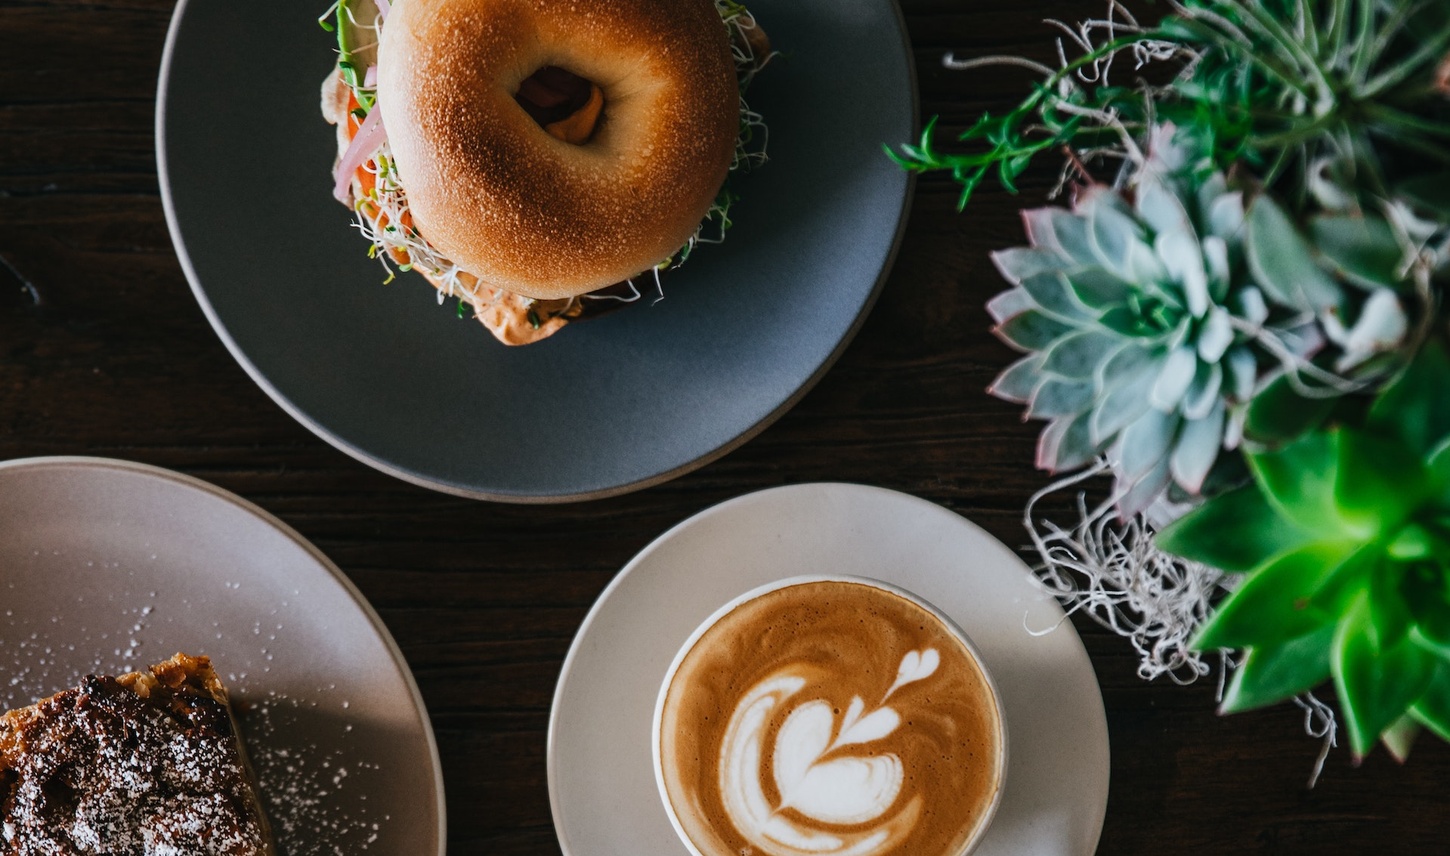 Bagel and coffee